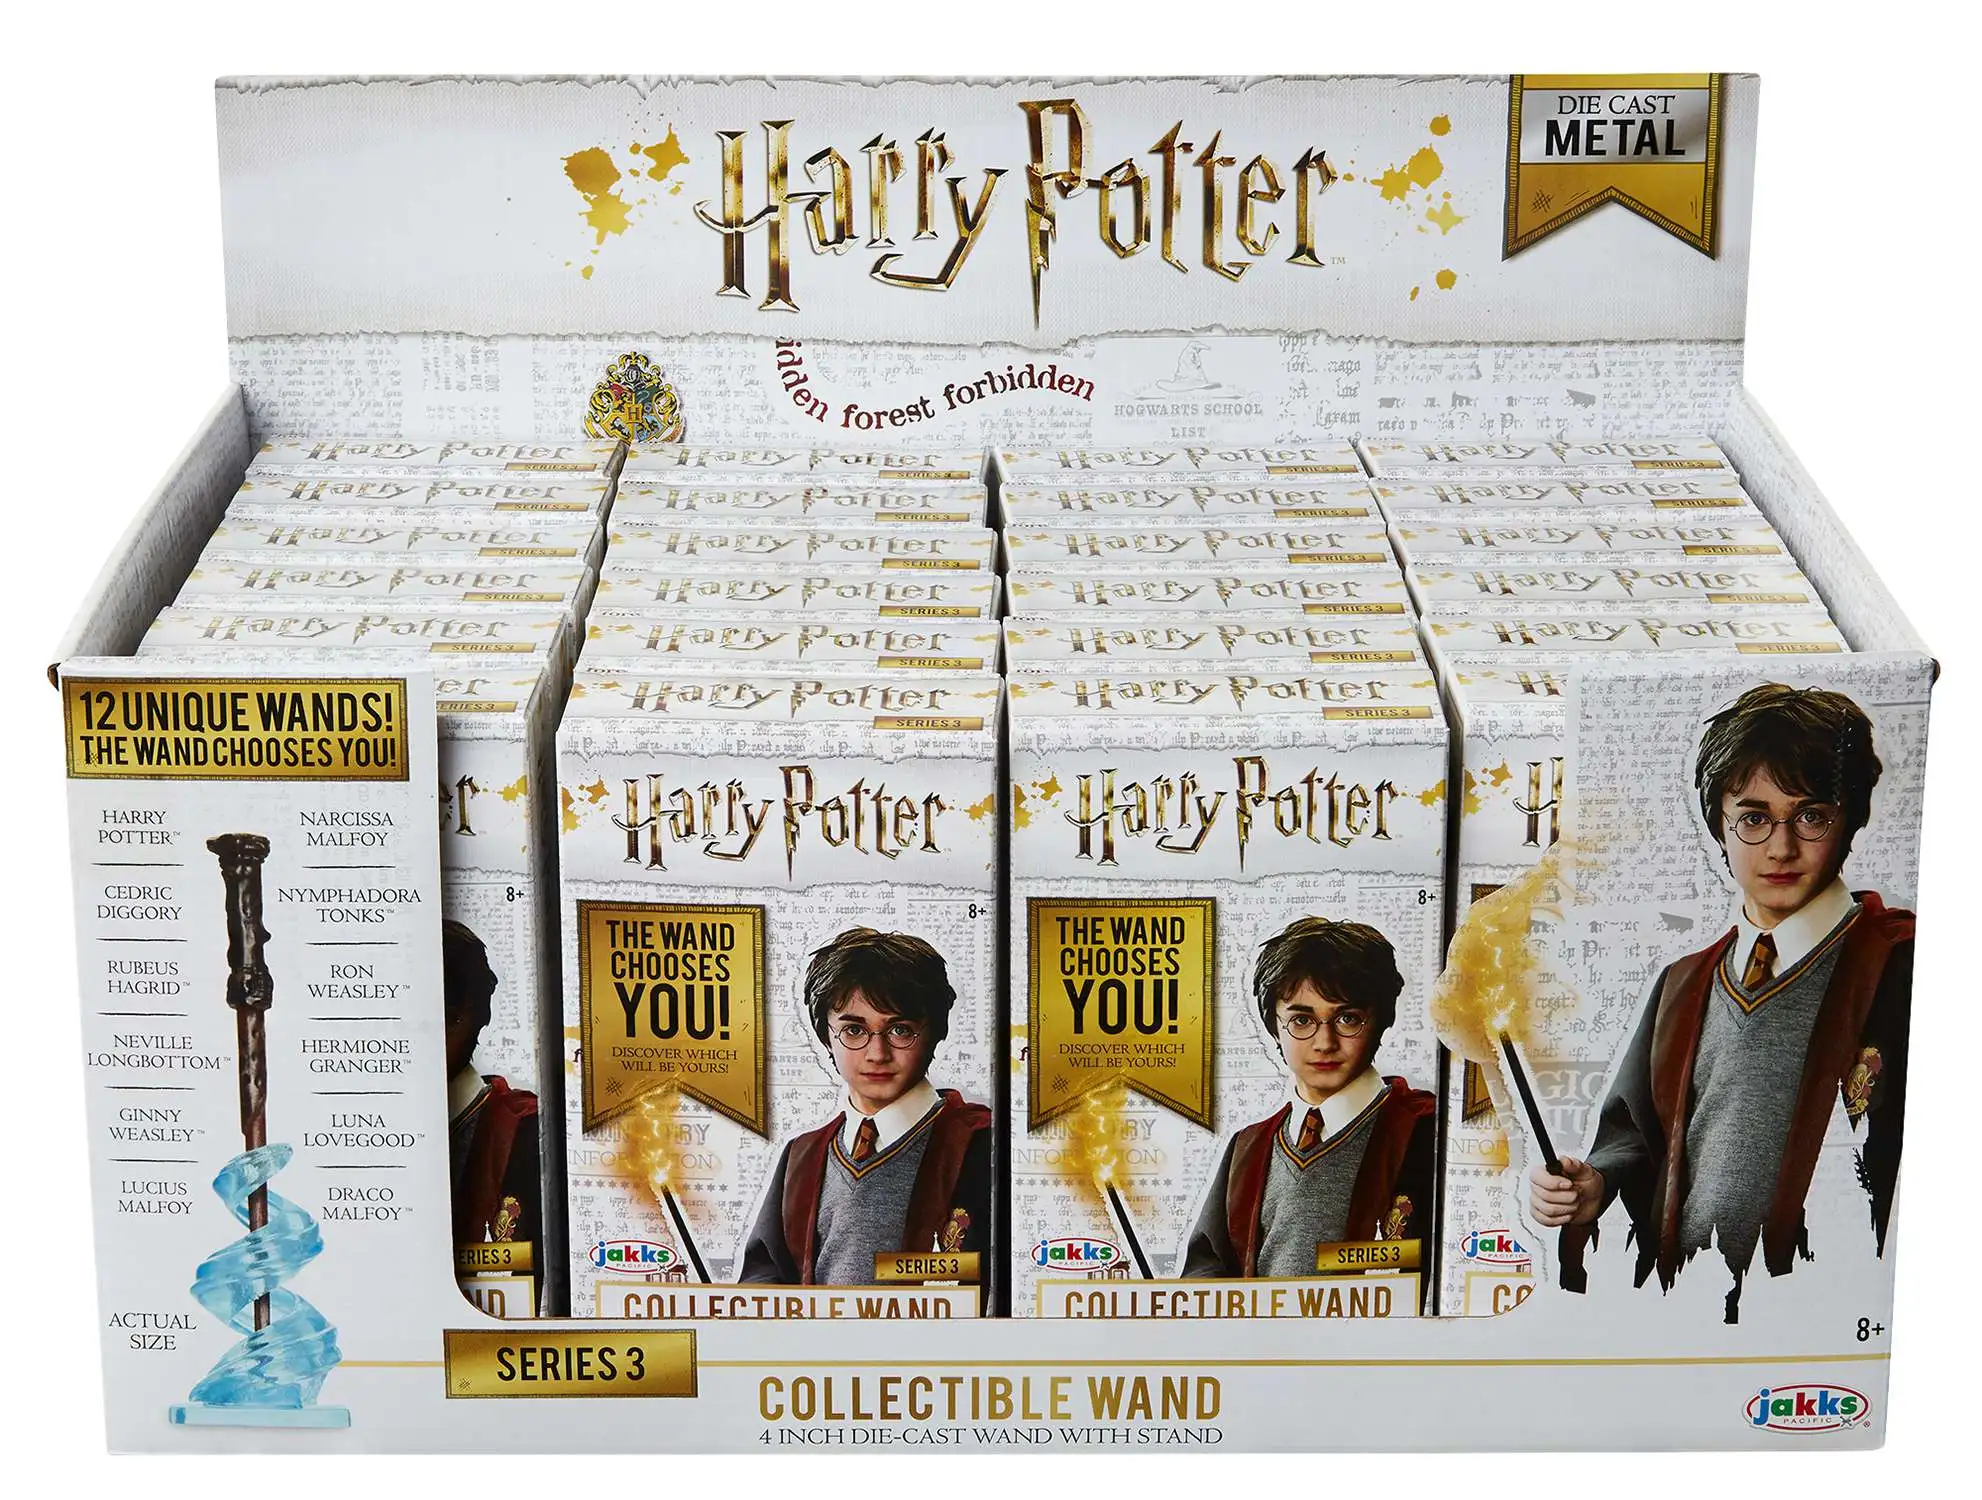 NIB HARRY POTTER Collectible Wand Mini 4 Inch Die-Cast Sealed *CASE OF 24* LOT 